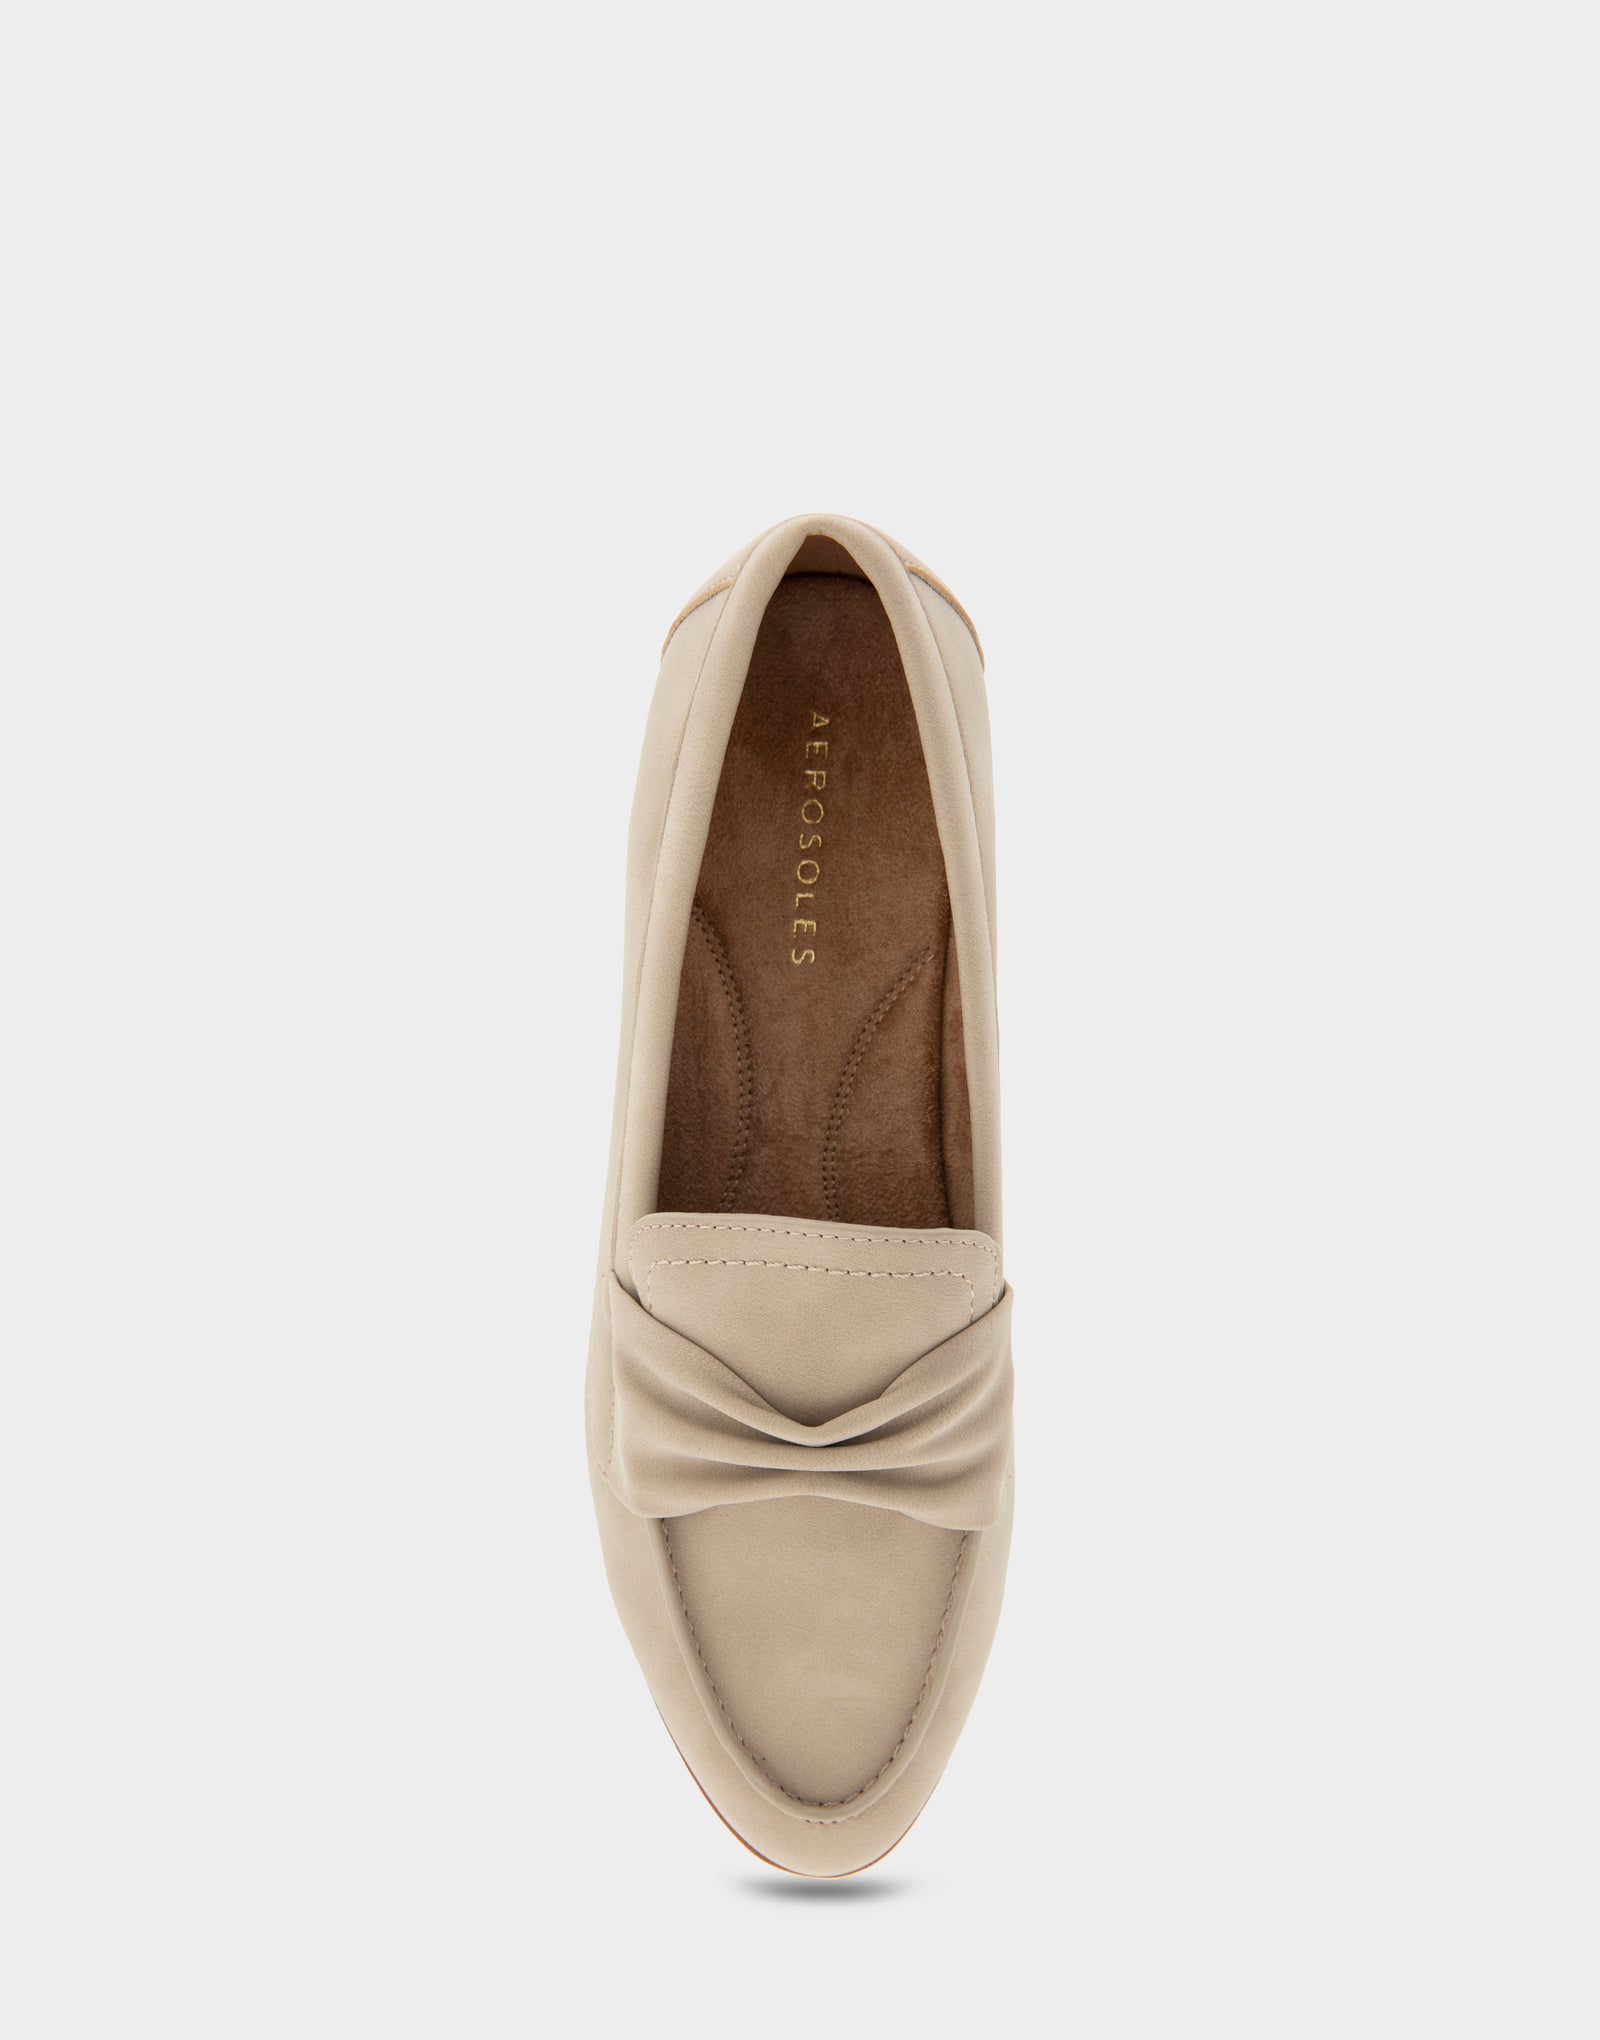 Women's Tailored Loafer in Pale Khaki Faux Leather